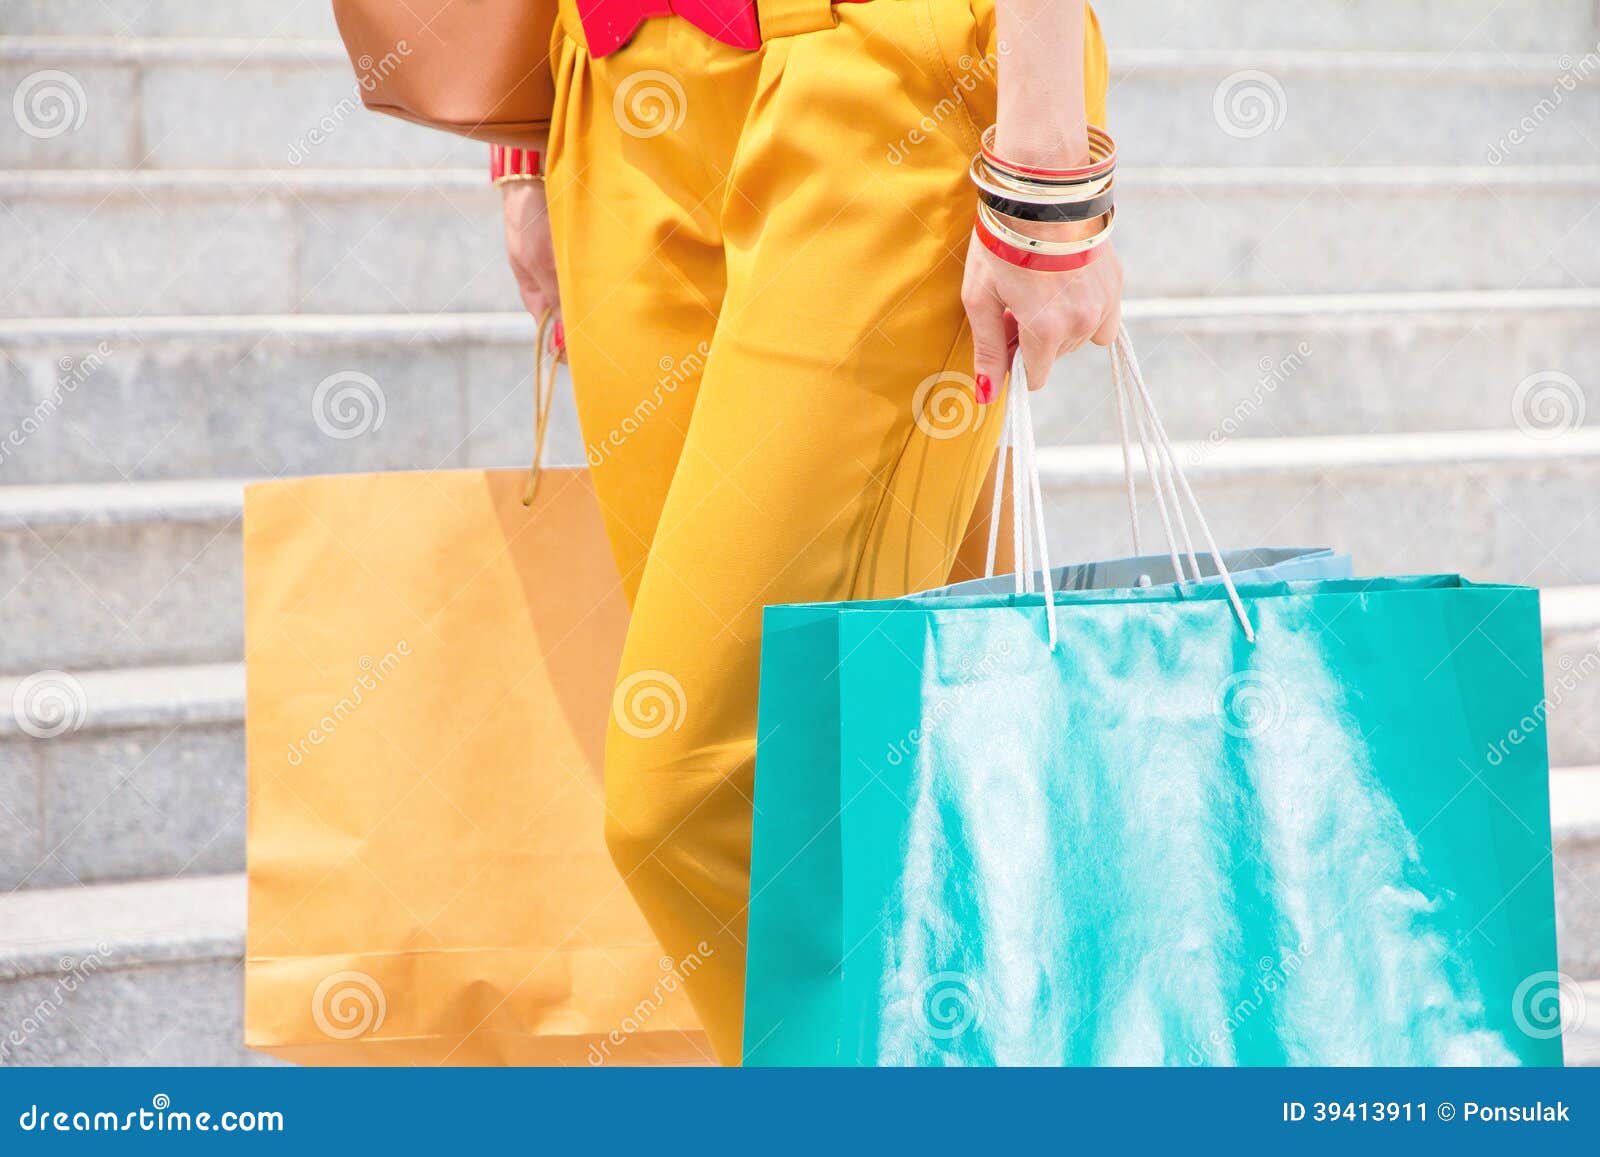 Women with shopping bags stock image. Image of domestic - 39413911